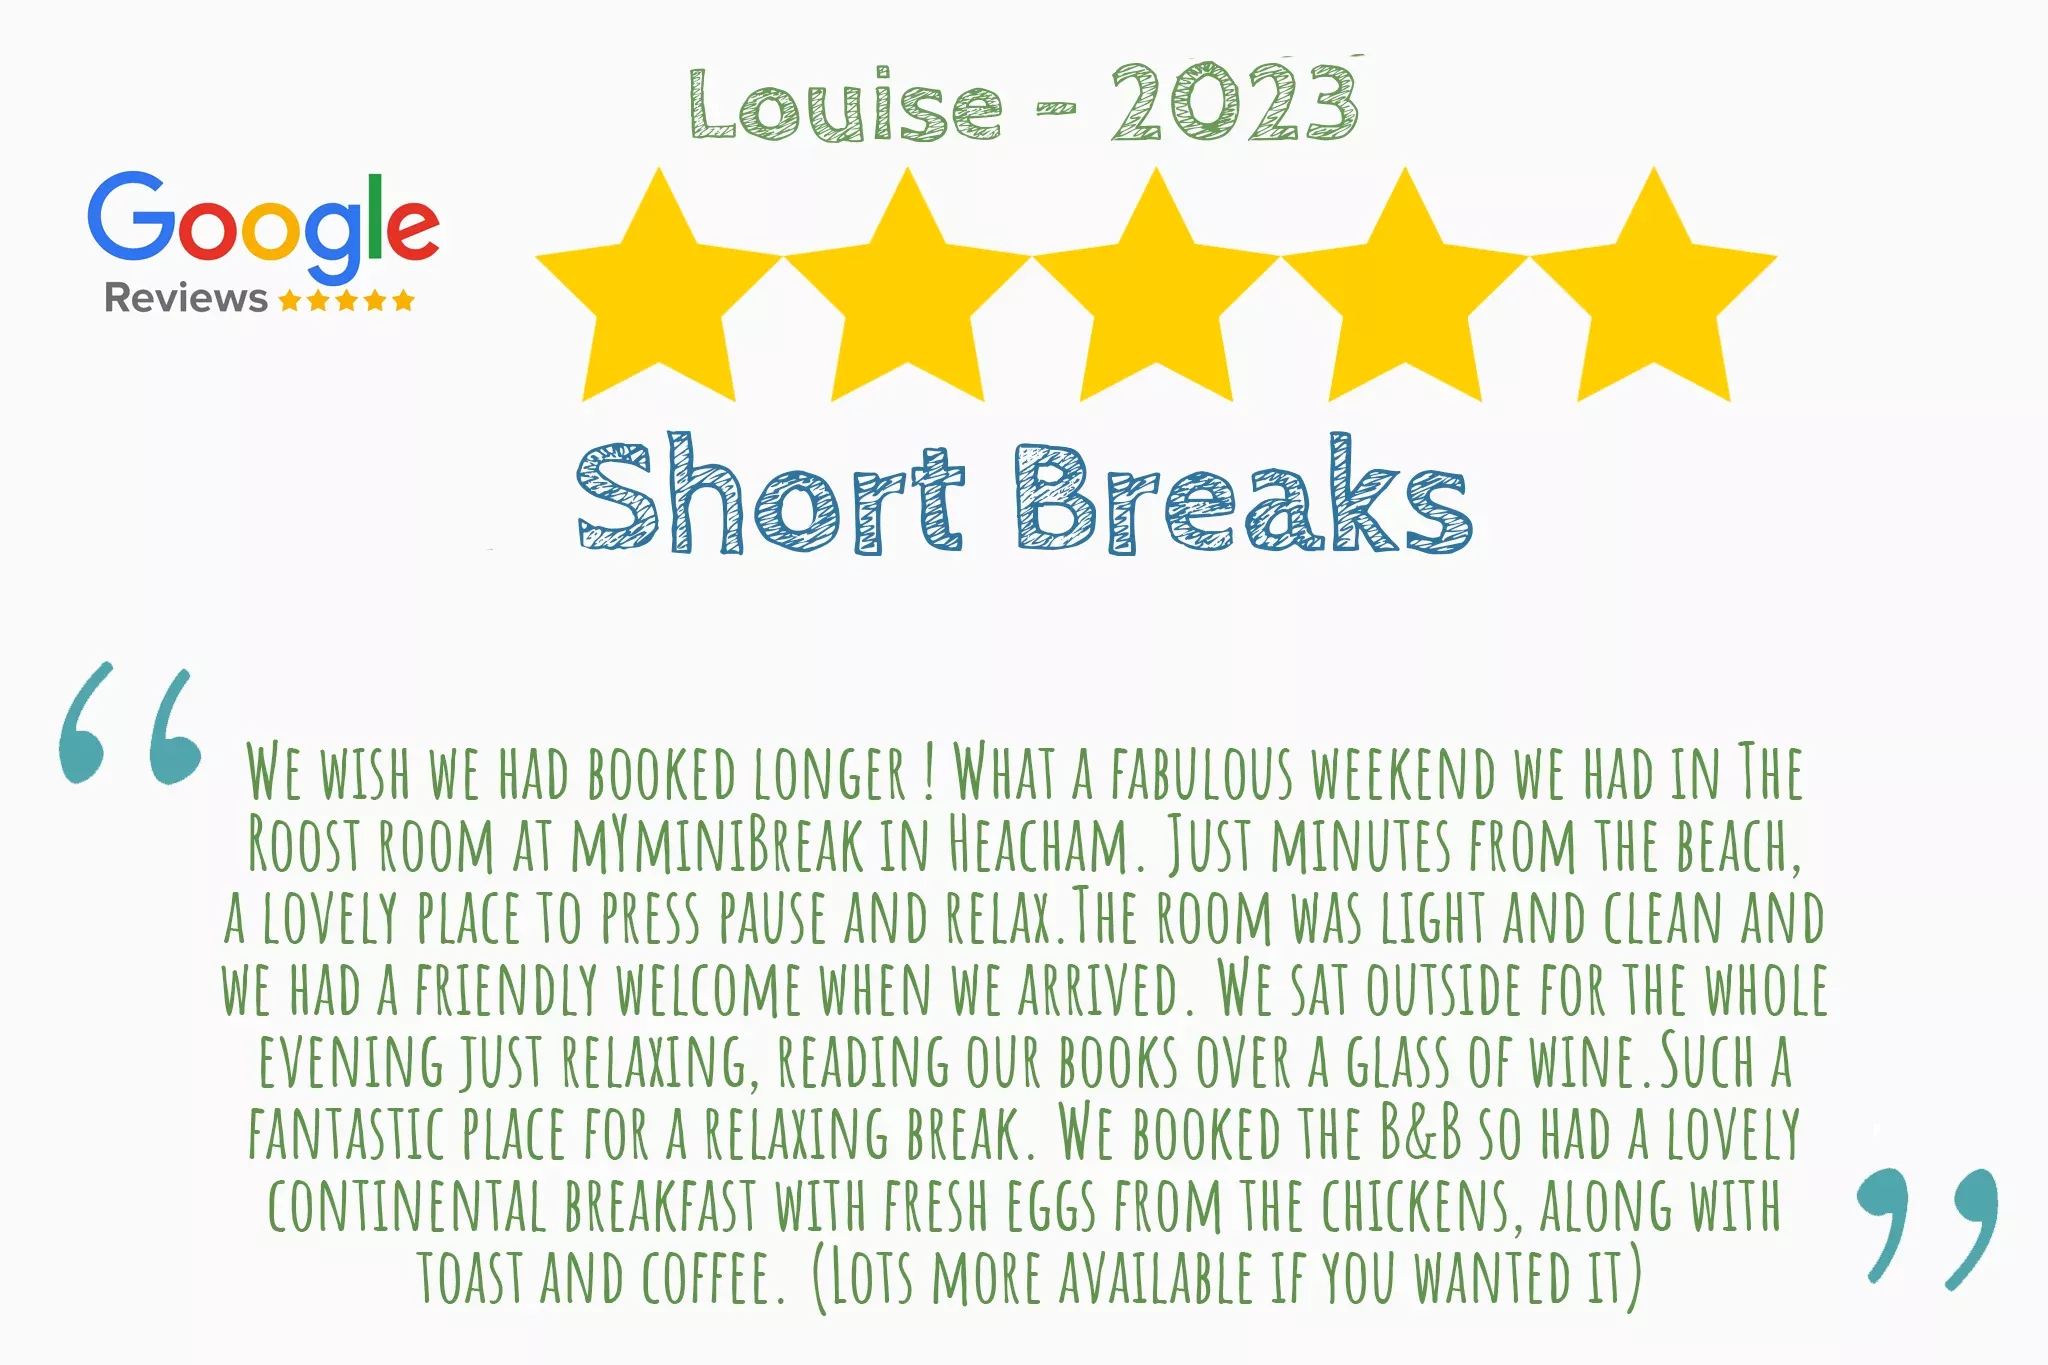 Five star review from Louise on Google Reviews that says "We wish we had booked longer ! What a fabulous weekend we had in The  Roost room at mYminiBreak in Heacham. Just minutes from the beach,  a lovely place to press pause and relax.The room was light and clean and  we had a friendly welcome when we arrived. We sat outside for the whole  evening just relaxing, reading our books over a glass of wine.Such a  fantastic place for a relaxing break. We booked the B&B so had a lovely  continental breakfast with fresh eggs from the chickens, along with  toast and coffee. (Lots more available if you wanted it)"